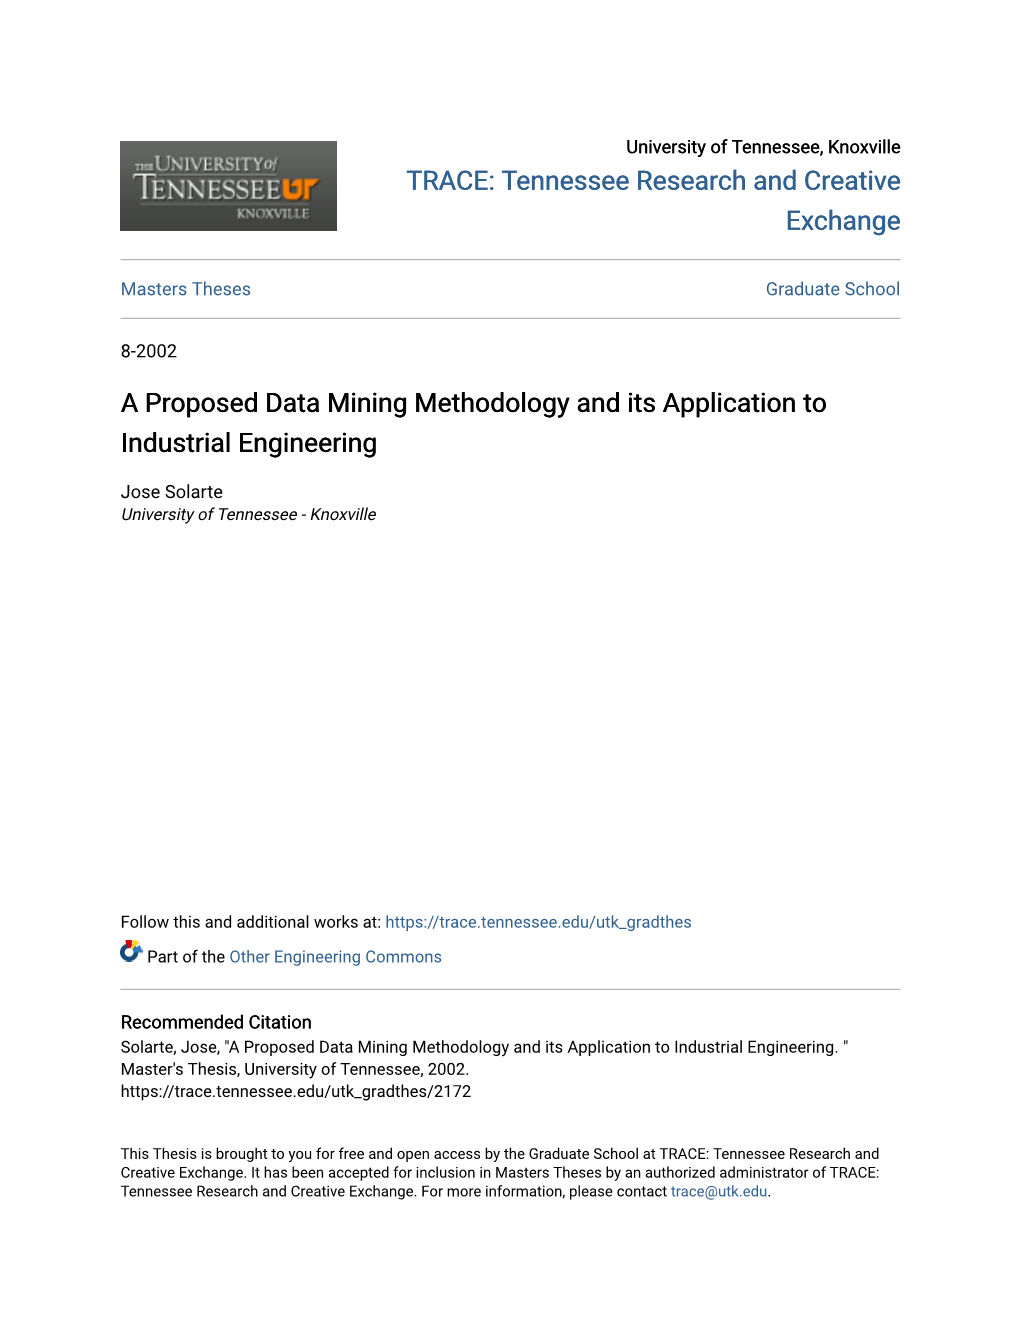 A Proposed Data Mining Methodology and Its Application to Industrial Engineering